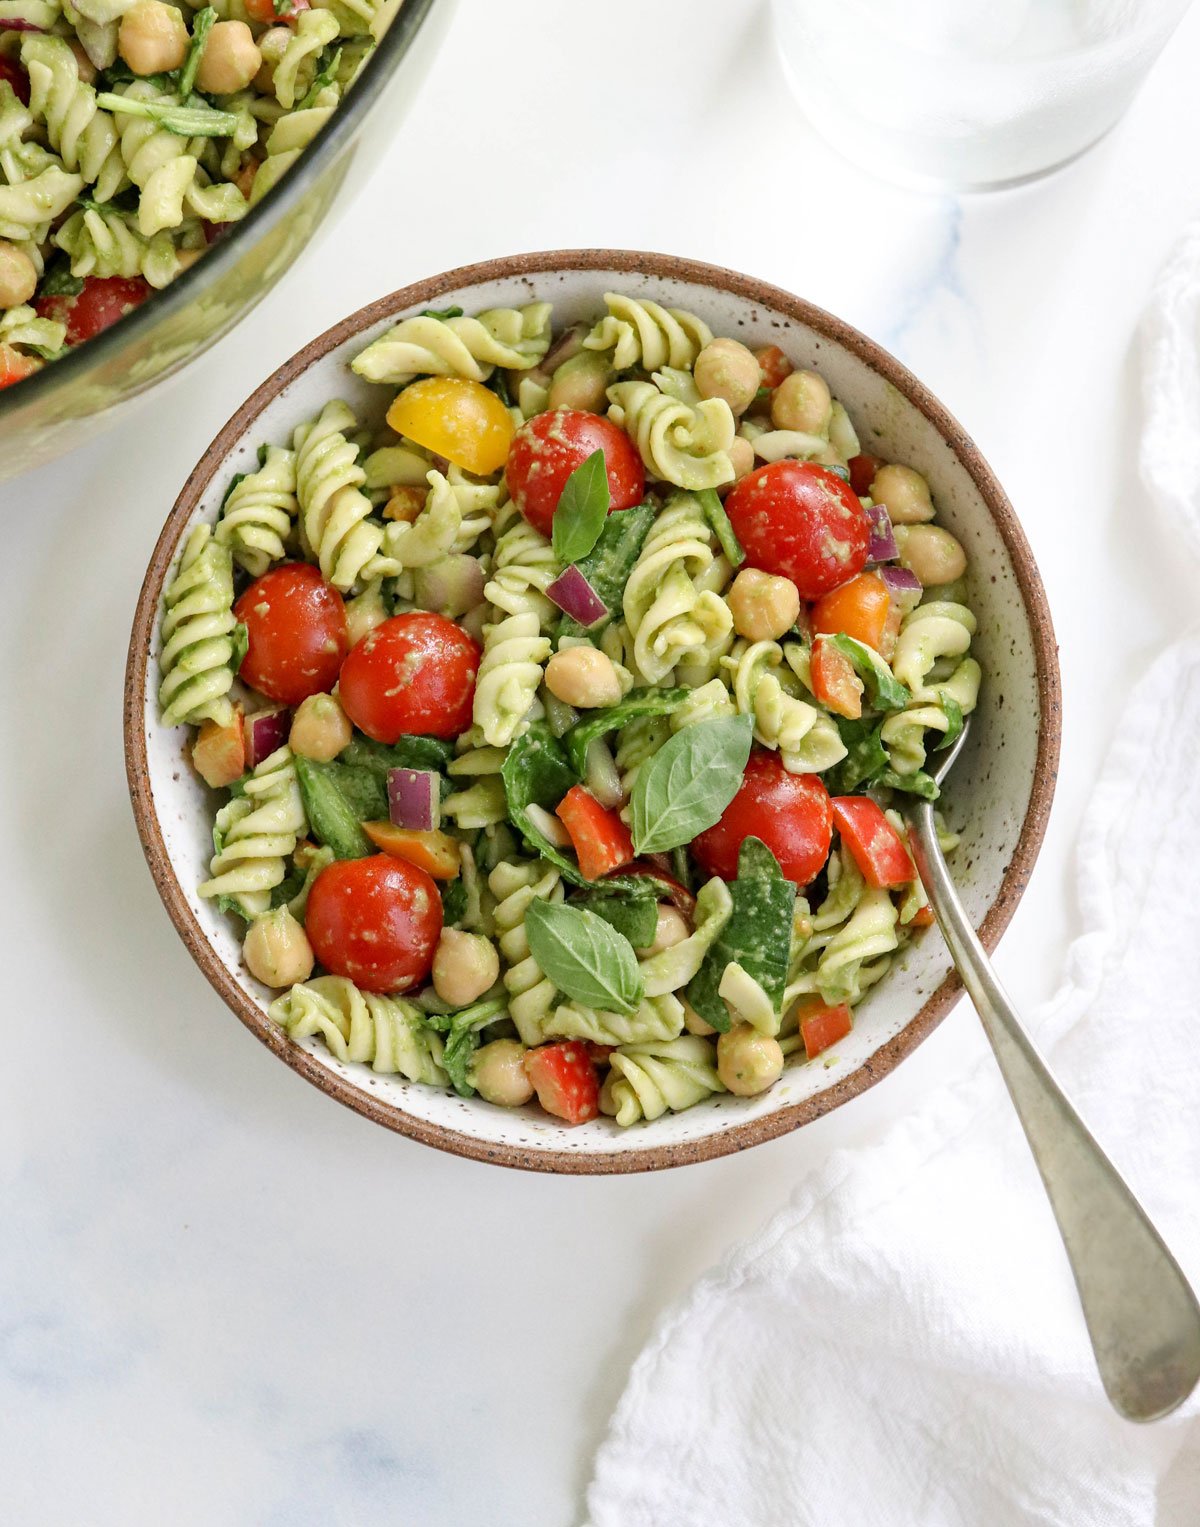 pesto pasta salad serving with a fork